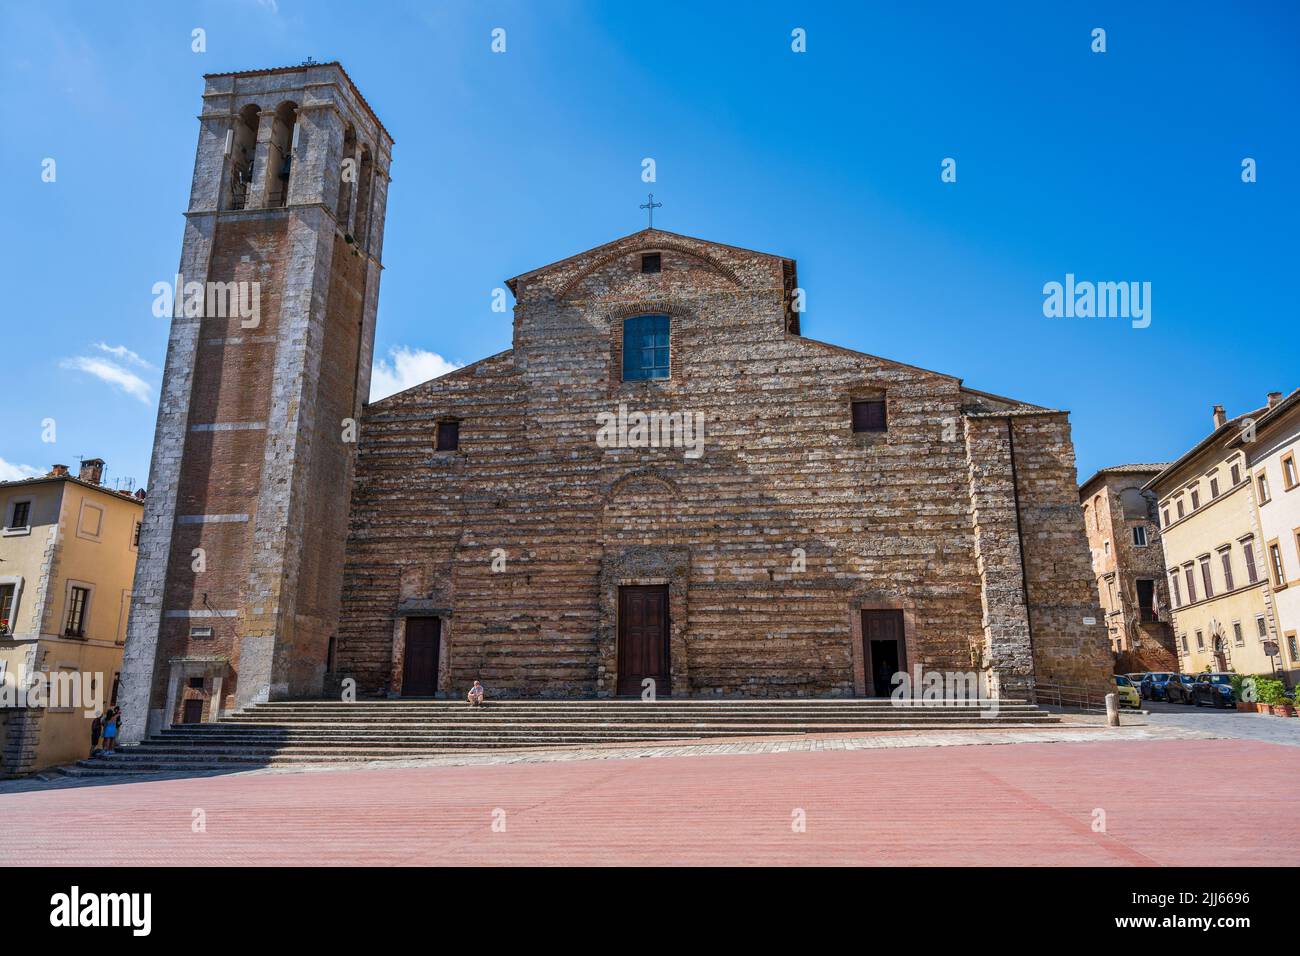 Montepulciano Cathedral (Duomo di Montepulciano) on Piazza Grande, the main square in the hilltop town of Montepulciano in Tuscany, Italy Stock Photo